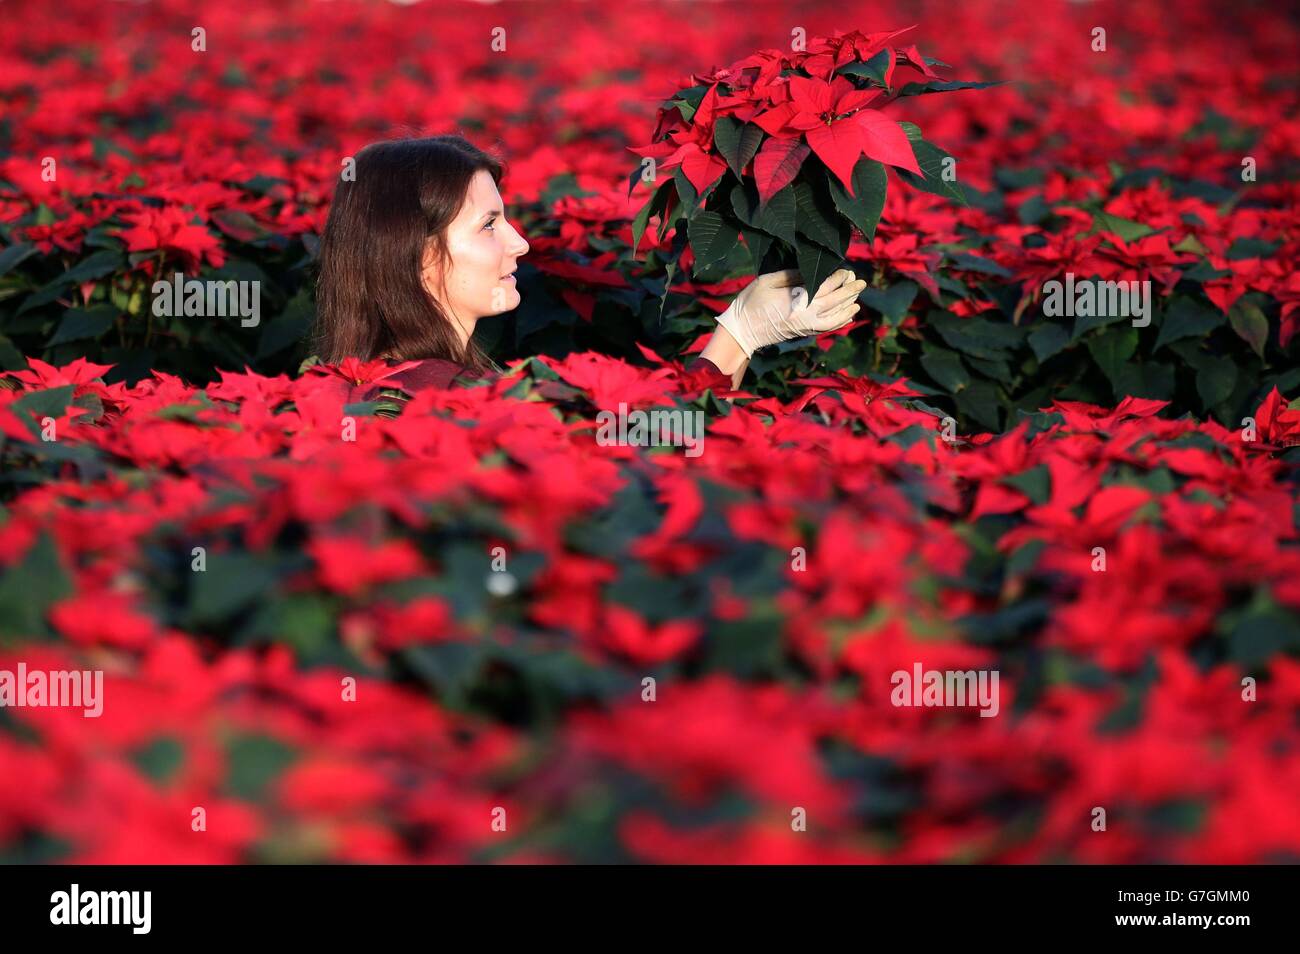 Evangelina Demkova, from Pentland Plants near Edinburgh, in one of the greenhouses amongst 100,000 red poinsettia as they are prepared and checked prior to being distributed to customers ahead of Christmas. Stock Photo